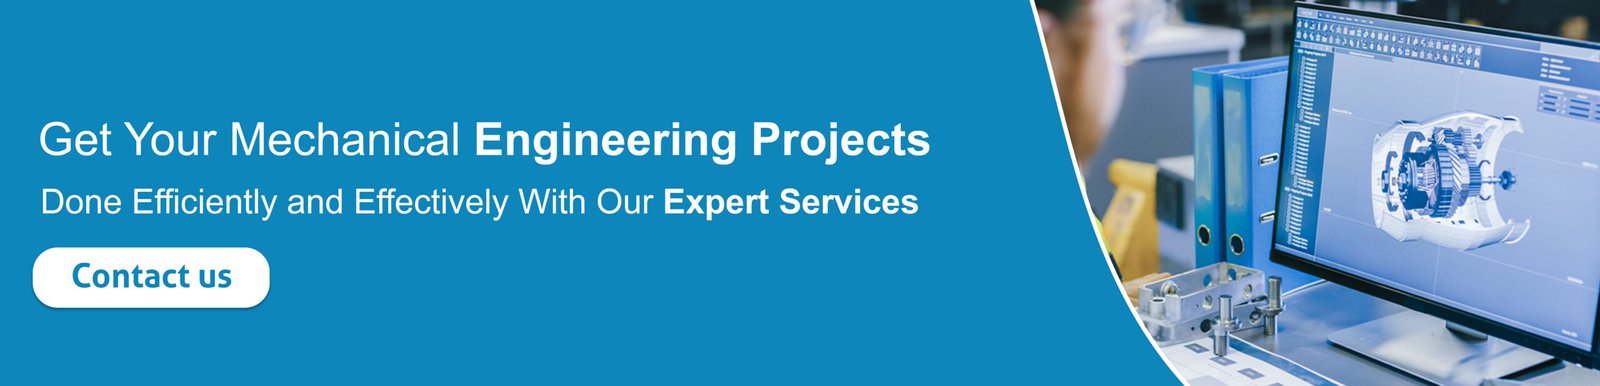 Get your mechanical engineering projects done efficiently and effectively with our expert services. 